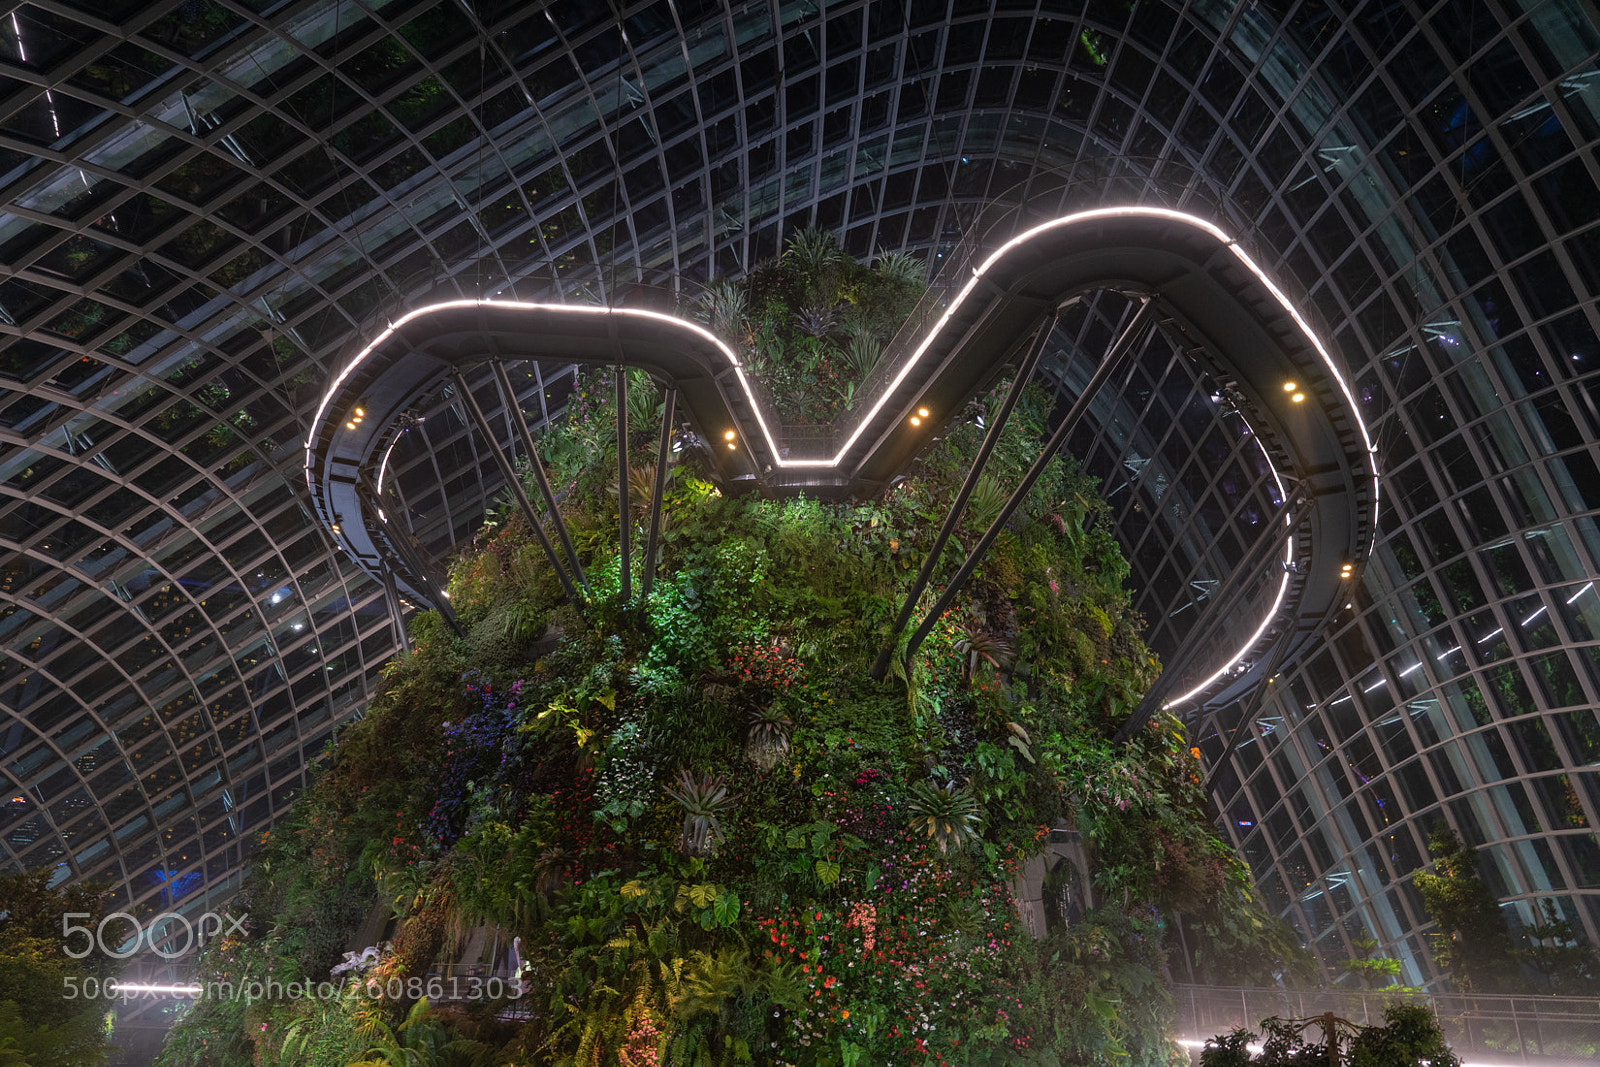 Sony a7 II sample photo. Cloud forest photography